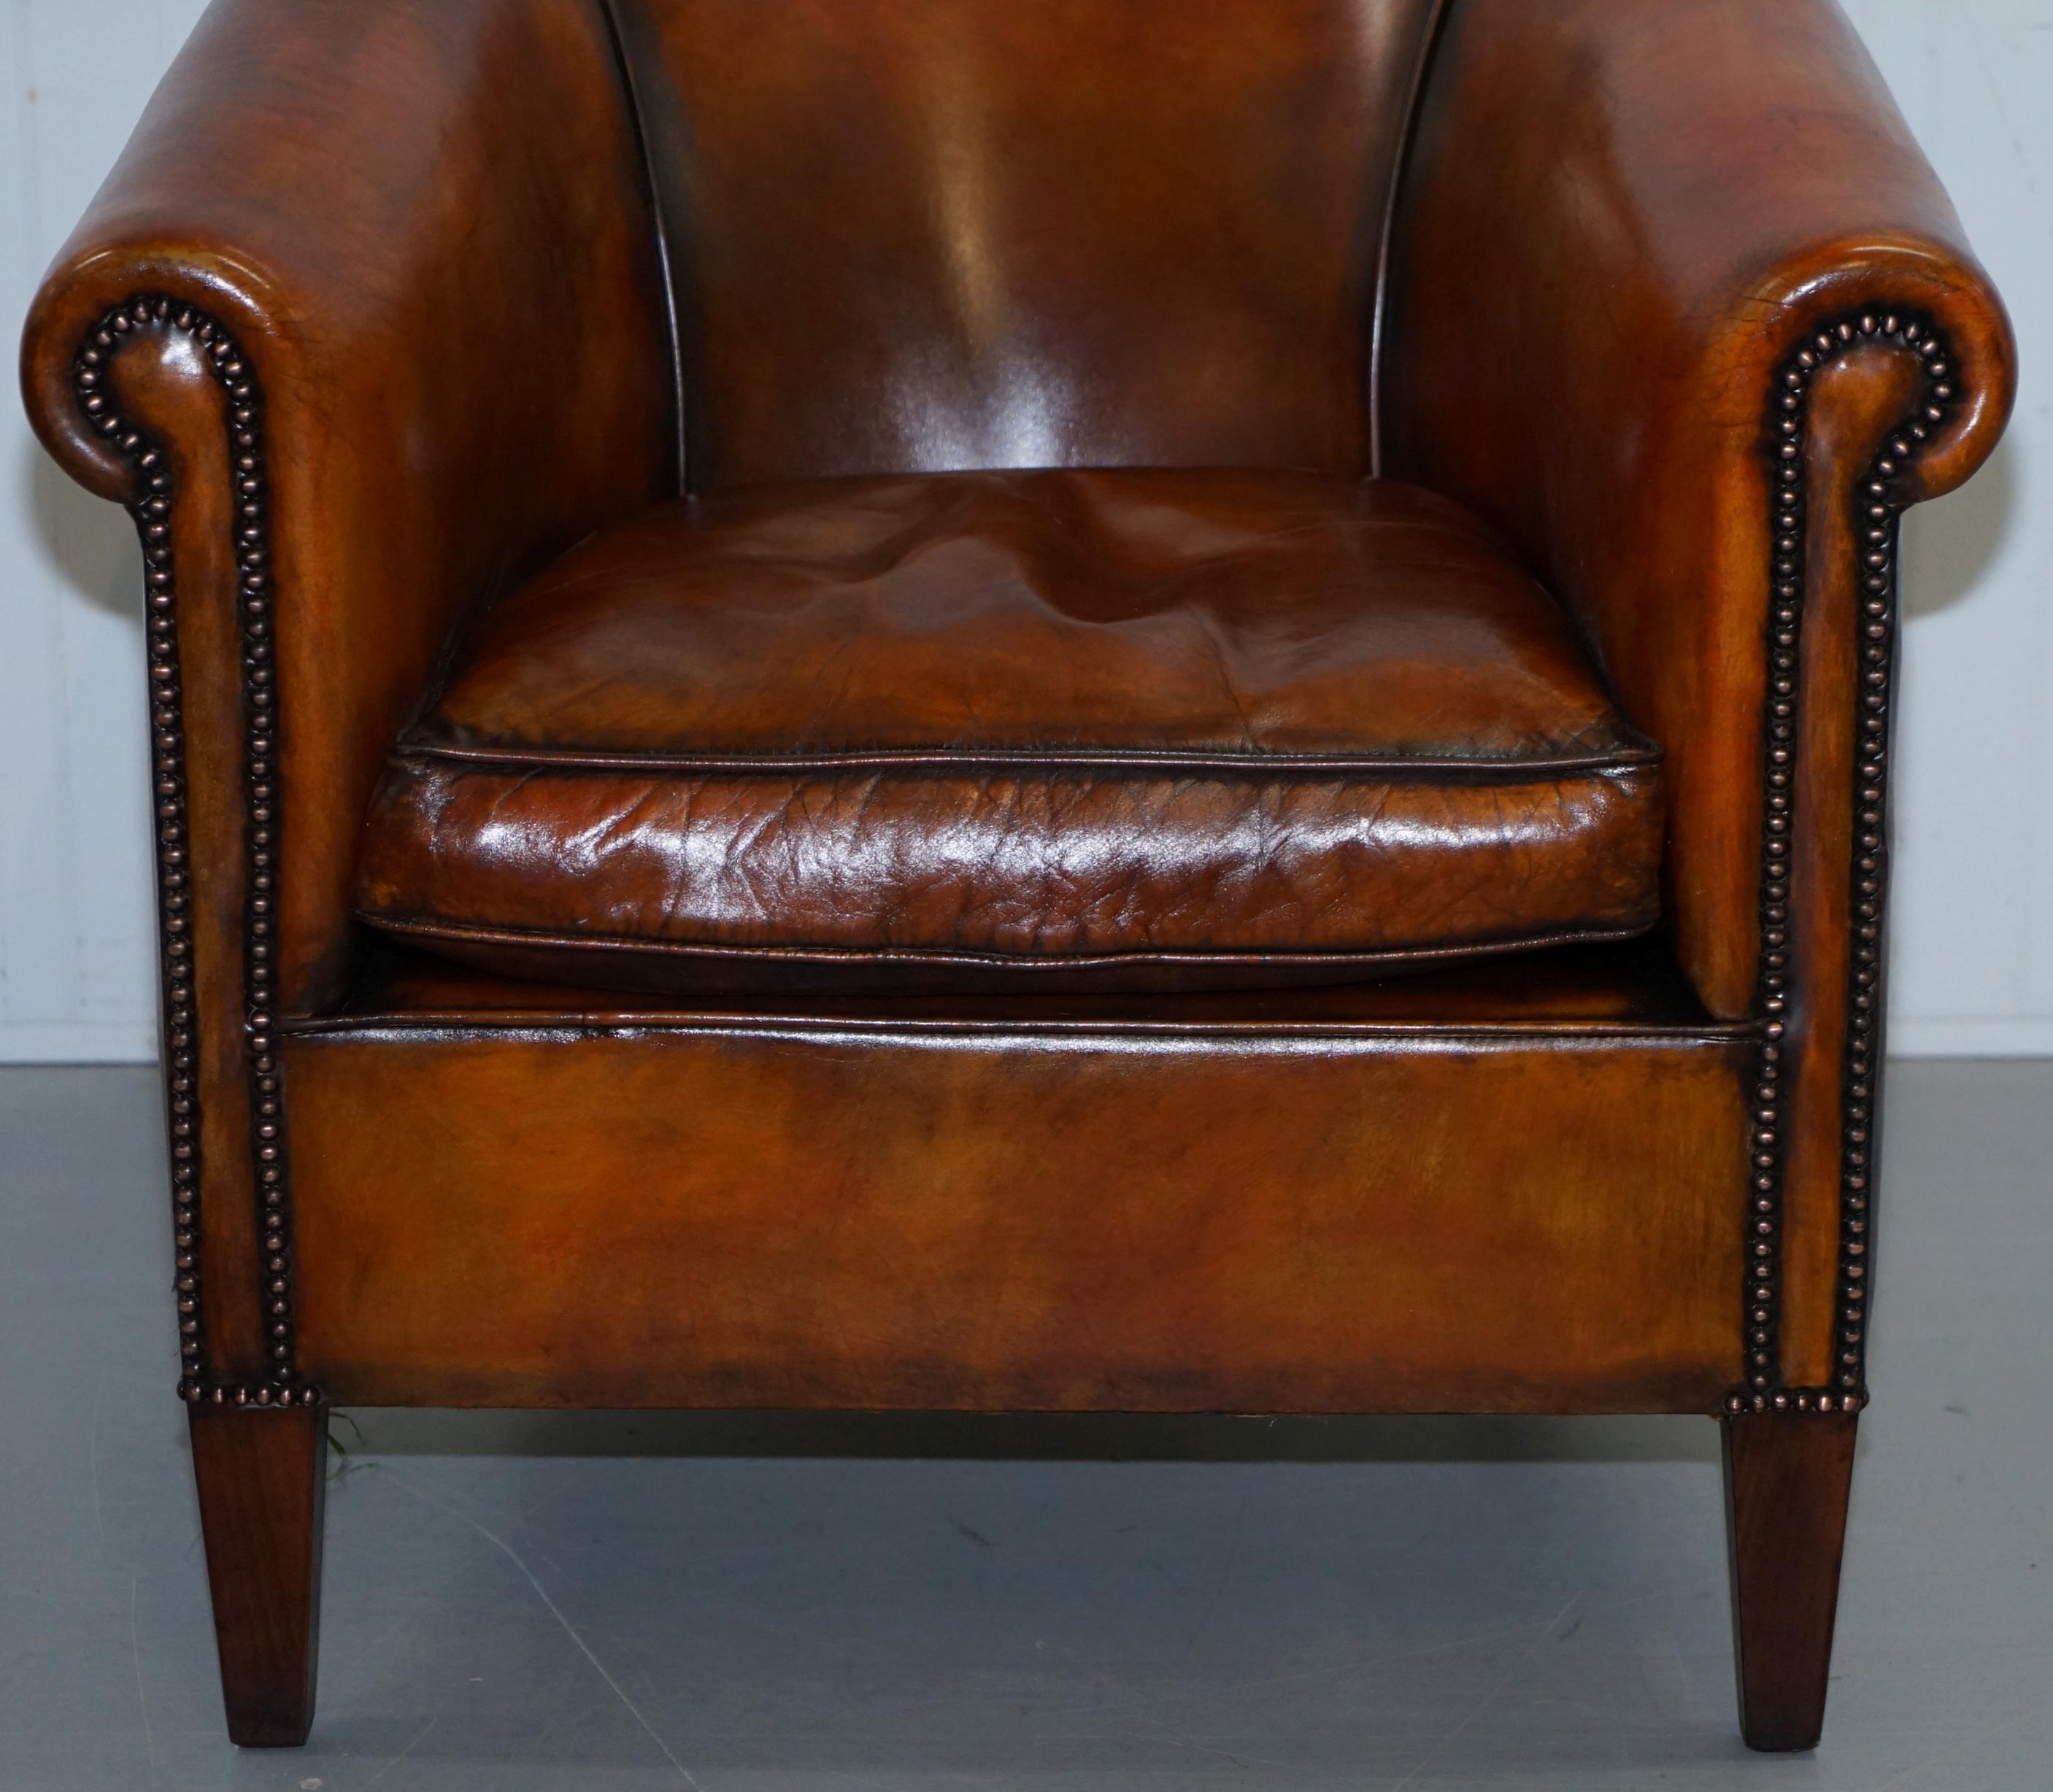 James Bond 007 Armchair from Spectre Leather Chairs of Bath Fully Restored 2